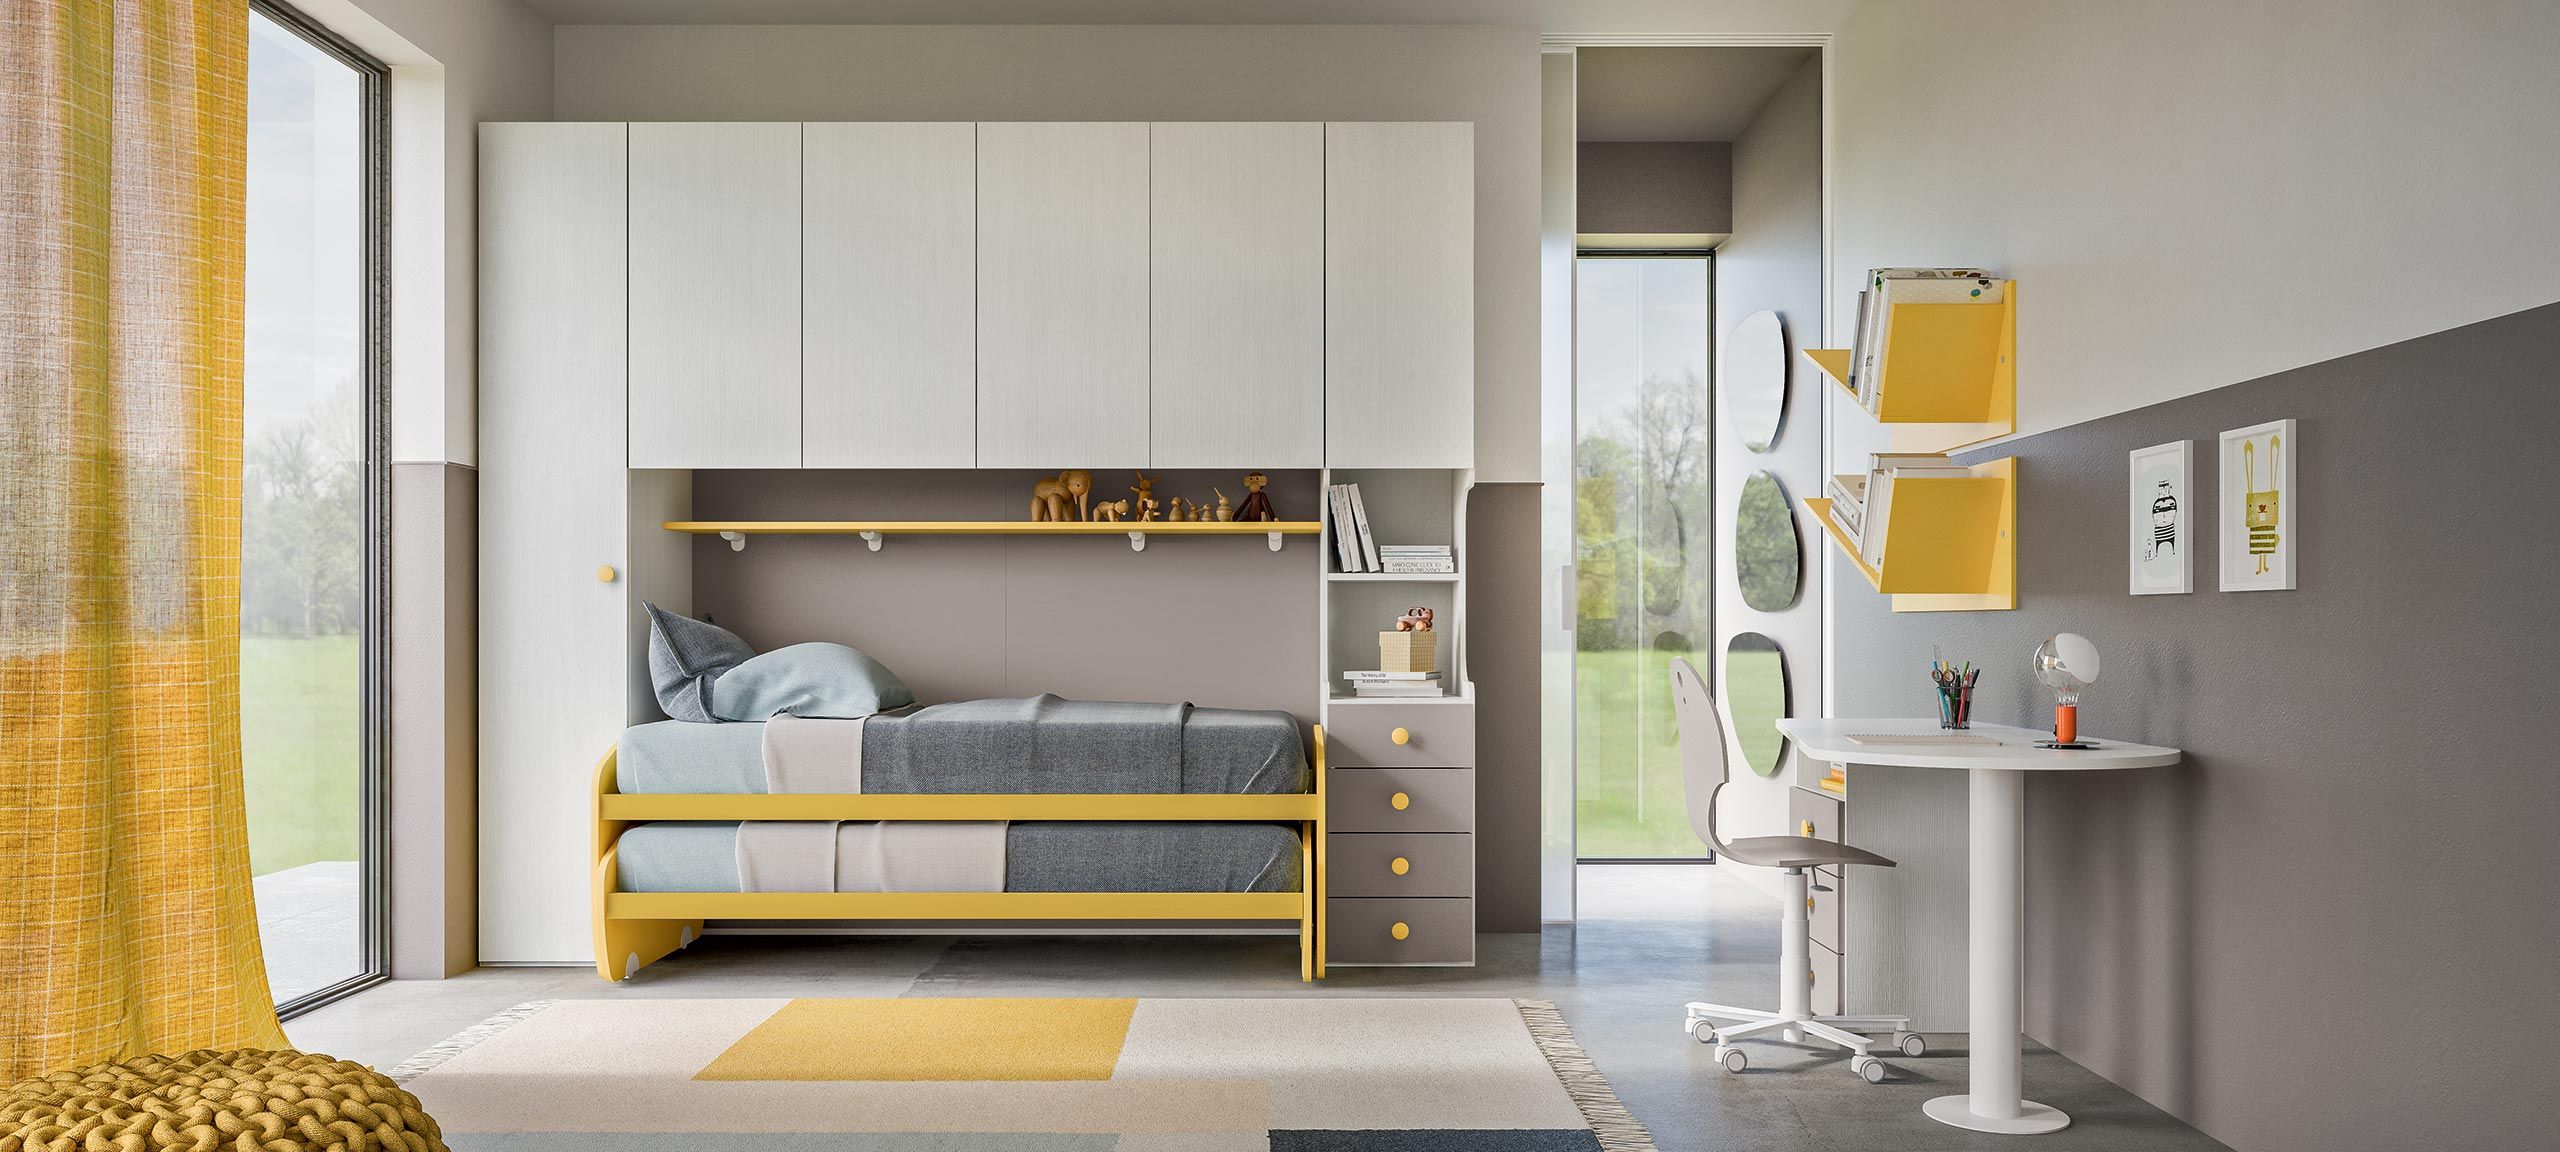 Children?s Bedrooms With Bedroom Cabins | Mab Home Furniture Within Overbed Wardrobes (View 3 of 20)